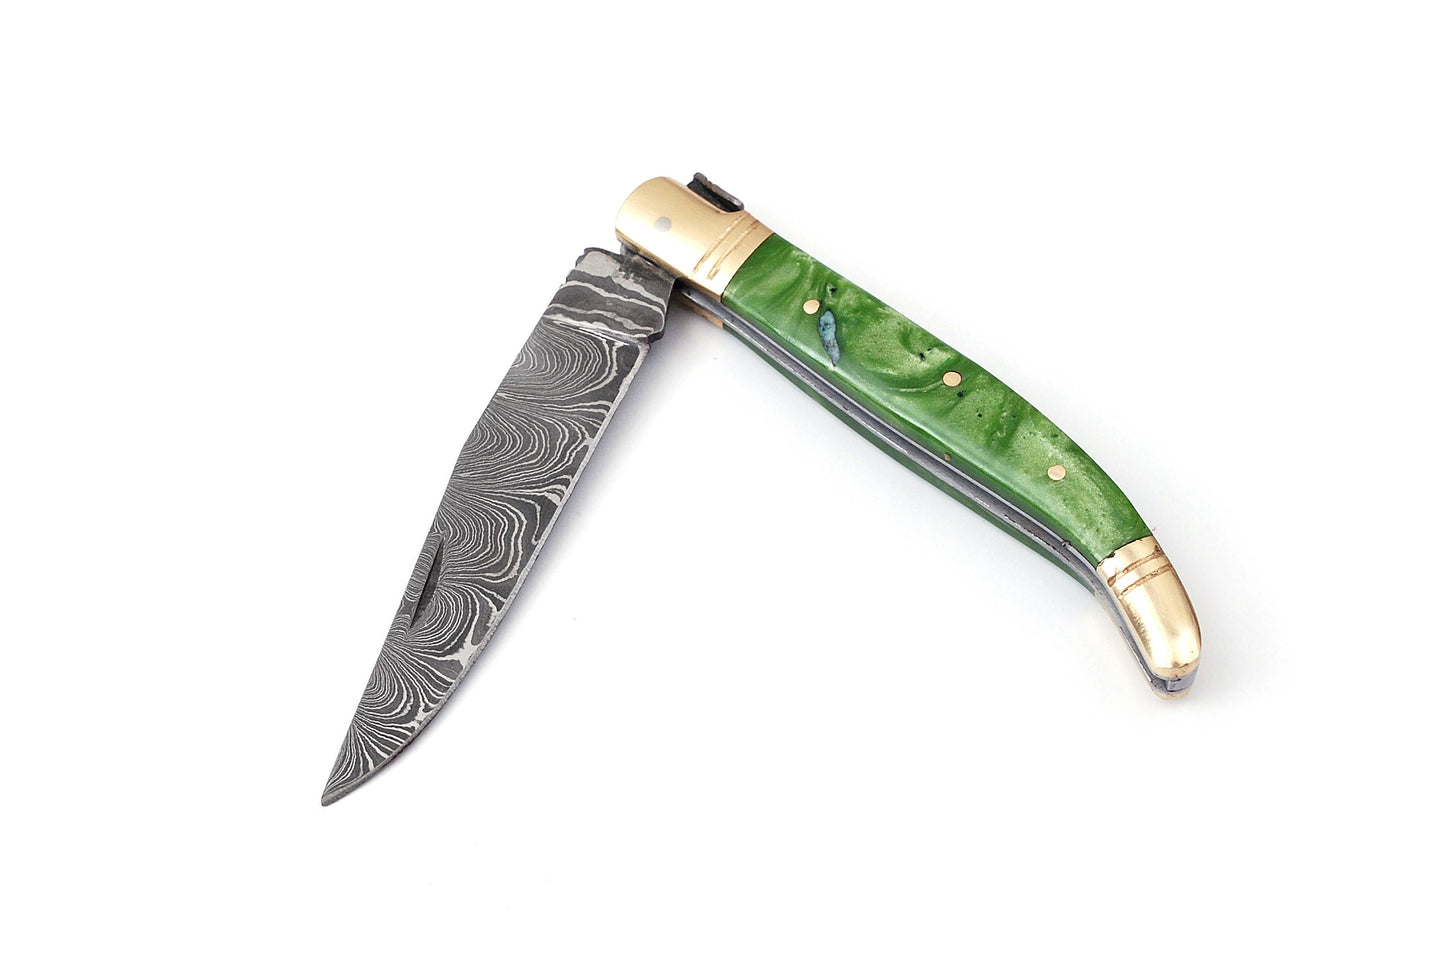 Laguiole Folding Damascus steel knife, 8.5" Long with 4" hand forged custom twist pattern Blade. Green color unshrinkable Raisen scale with brass bolster, Cow hide leather sheath included